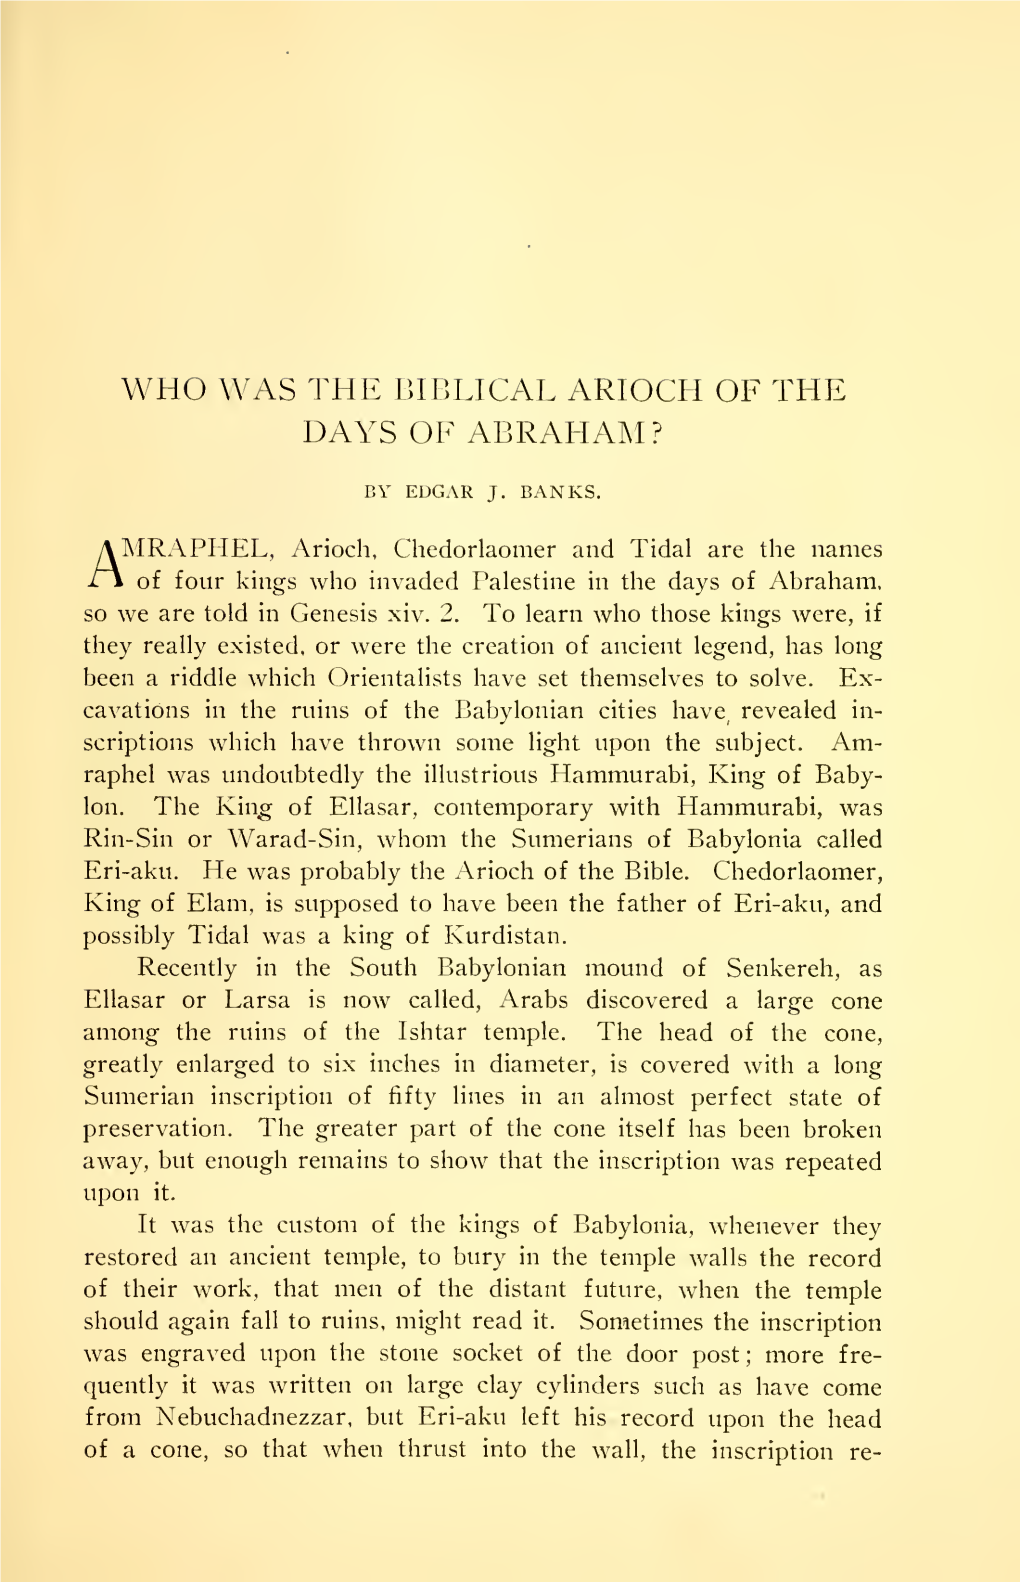 Who Was the Biblical Arioch of the Days of Ahraham?